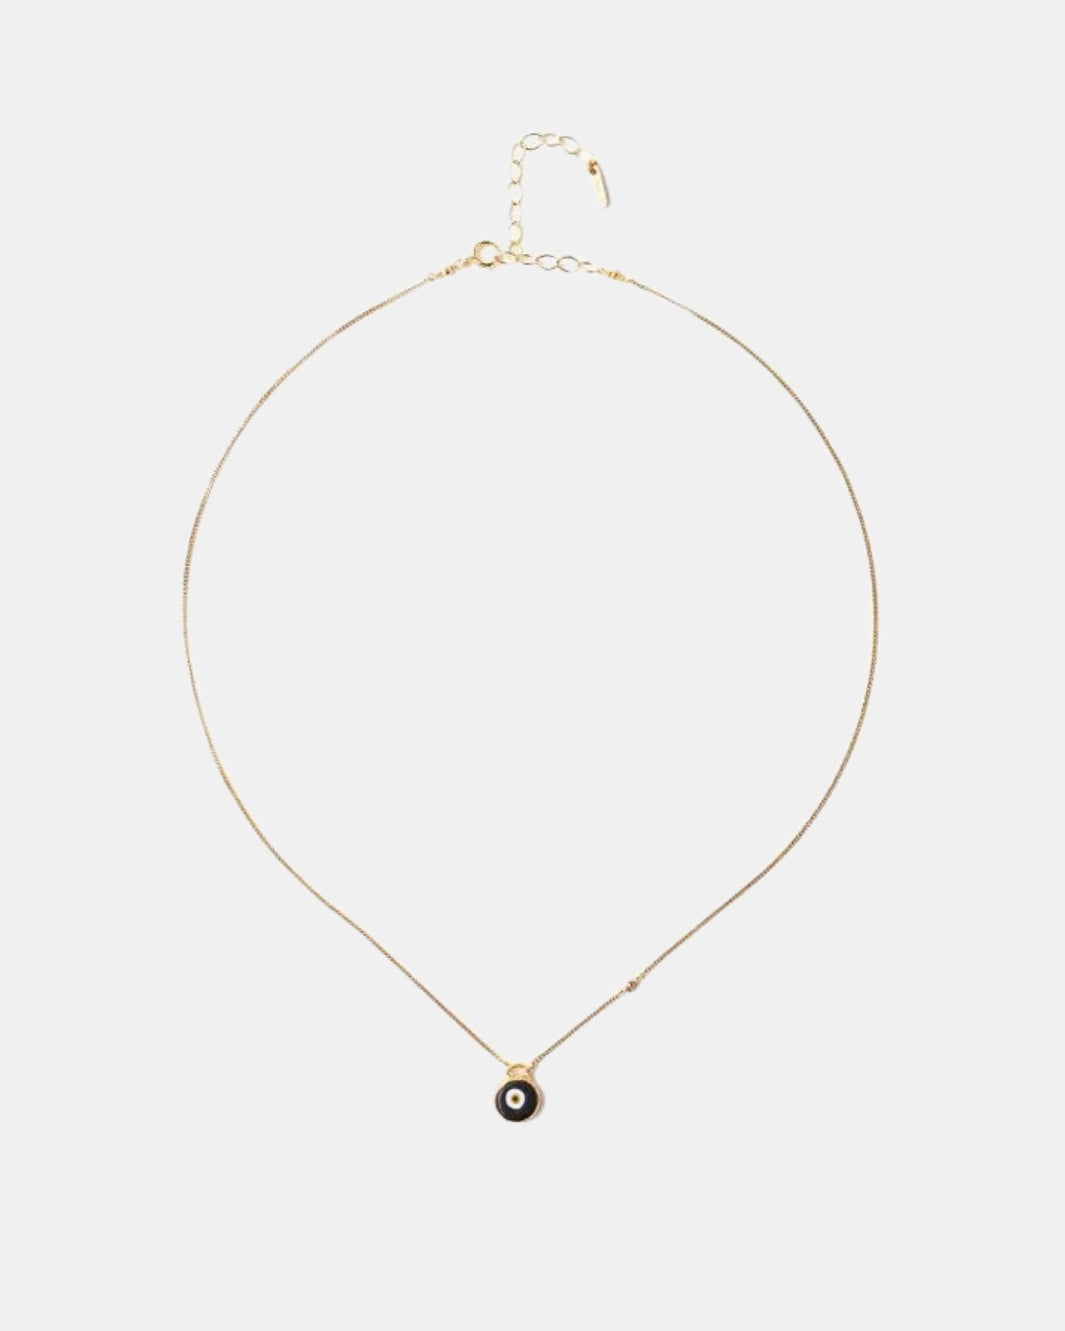 EVIL EYE NECKLACE WITH CHAMPAGNE DIAMOND IN BLACK - Romi Boutique